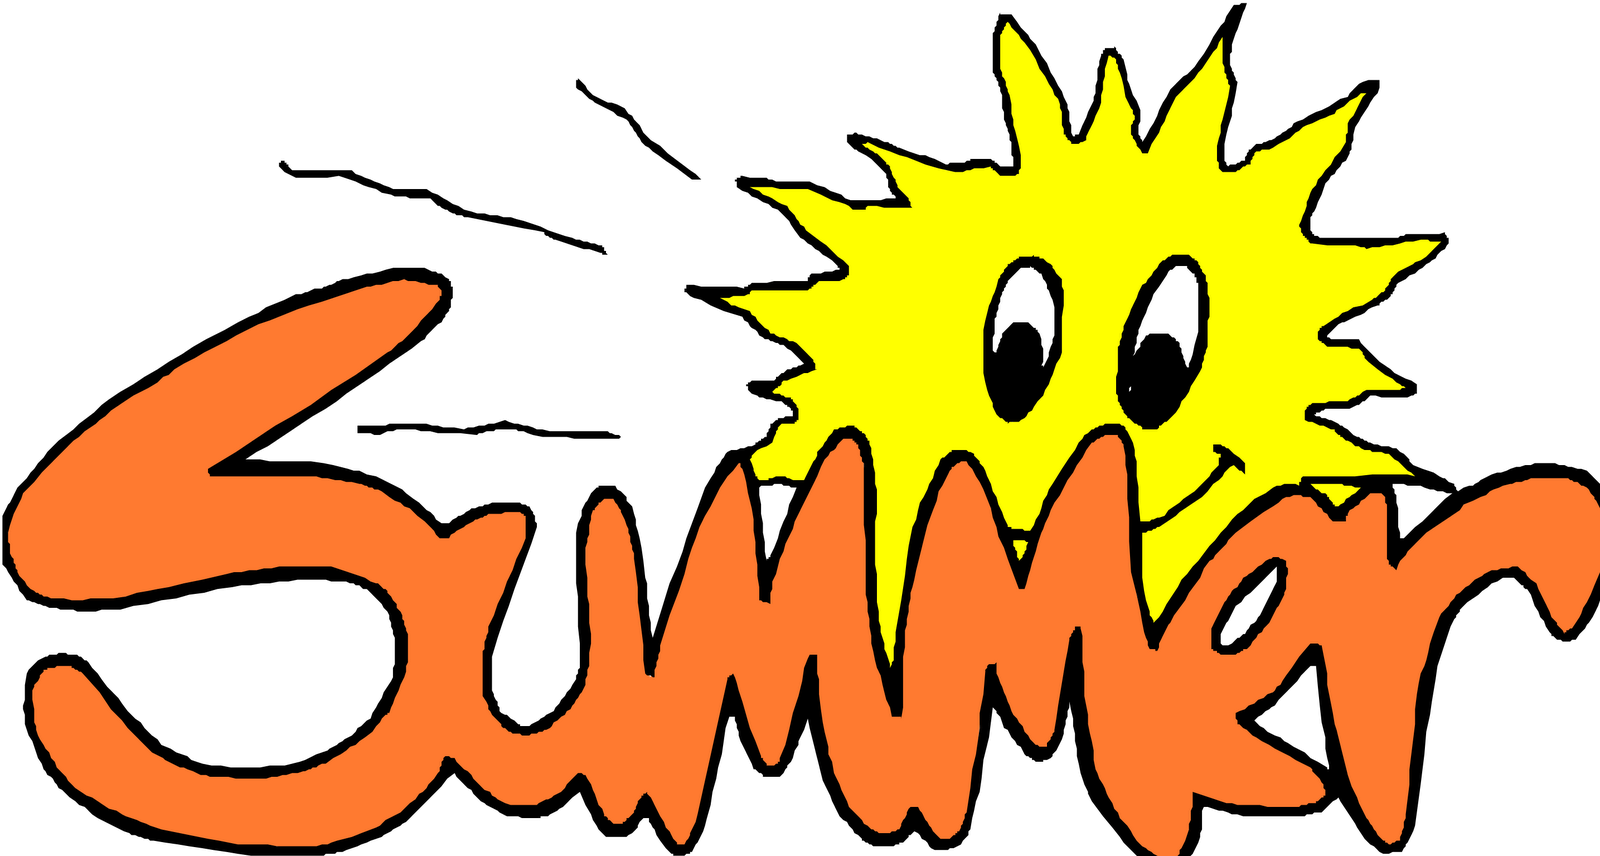 Summer School Clipart | Clipart library - Free Clipart Images